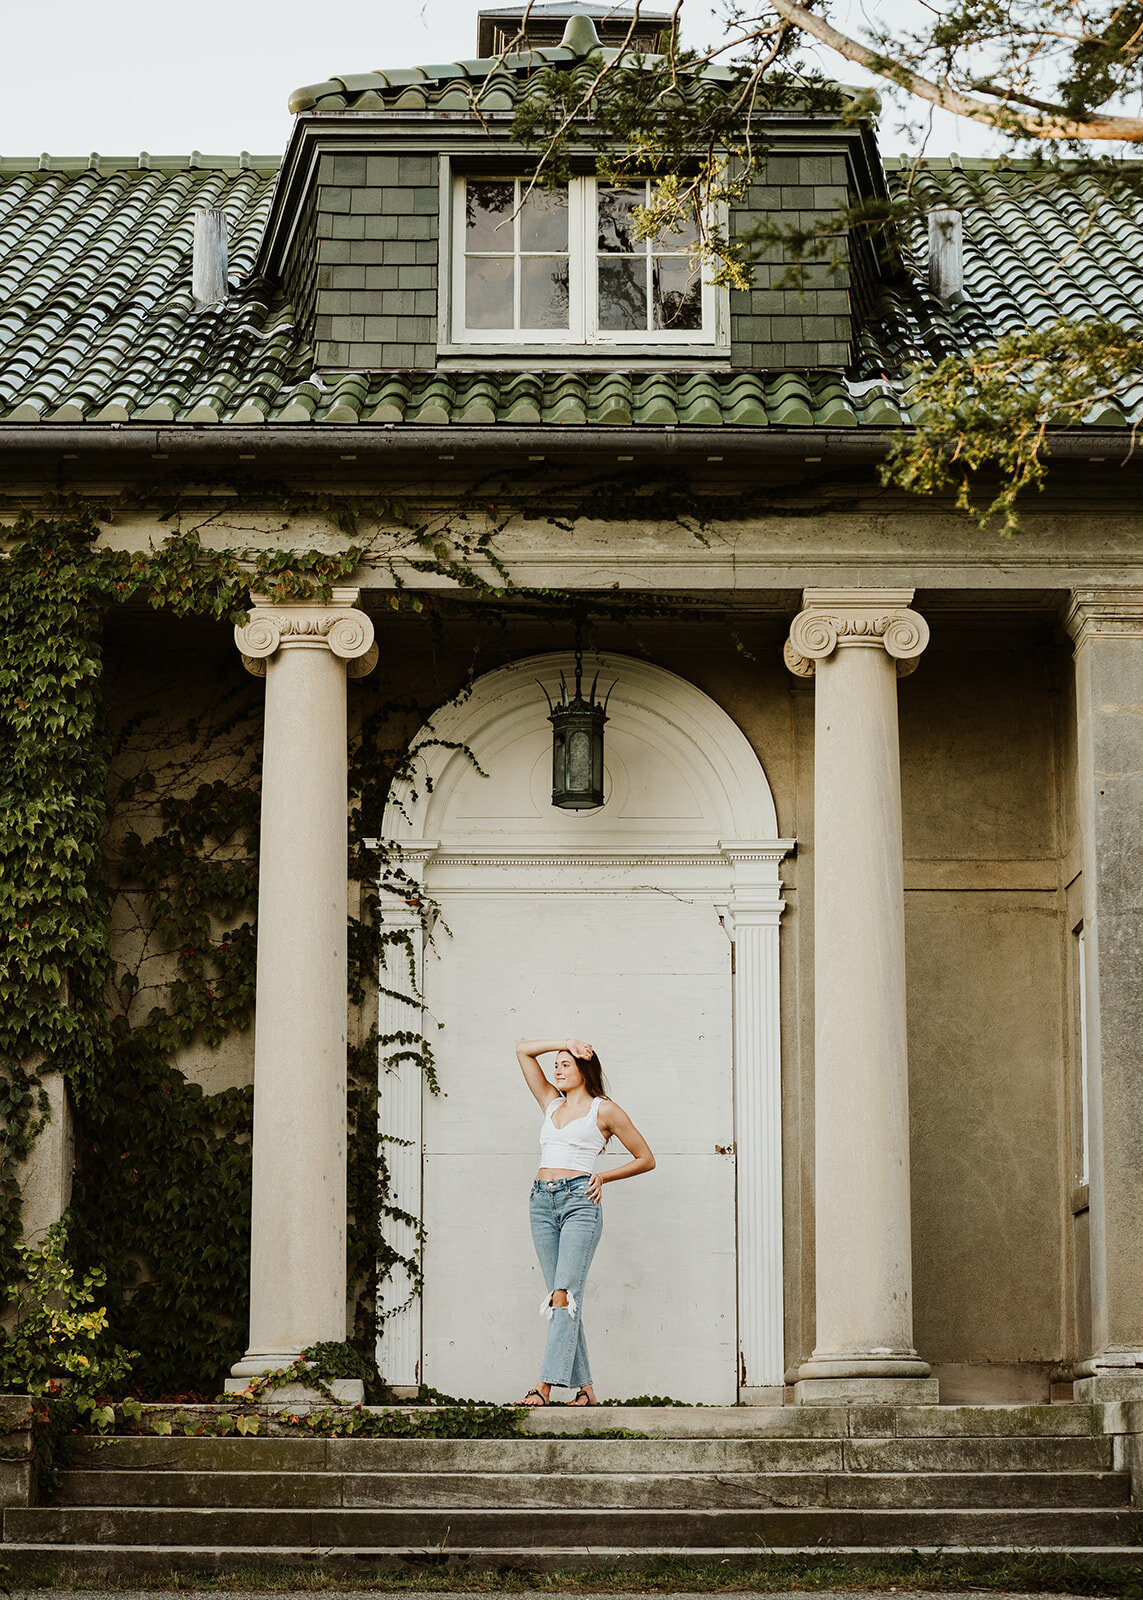 Sara McIngvale is a portrait photographer based in Connecticut